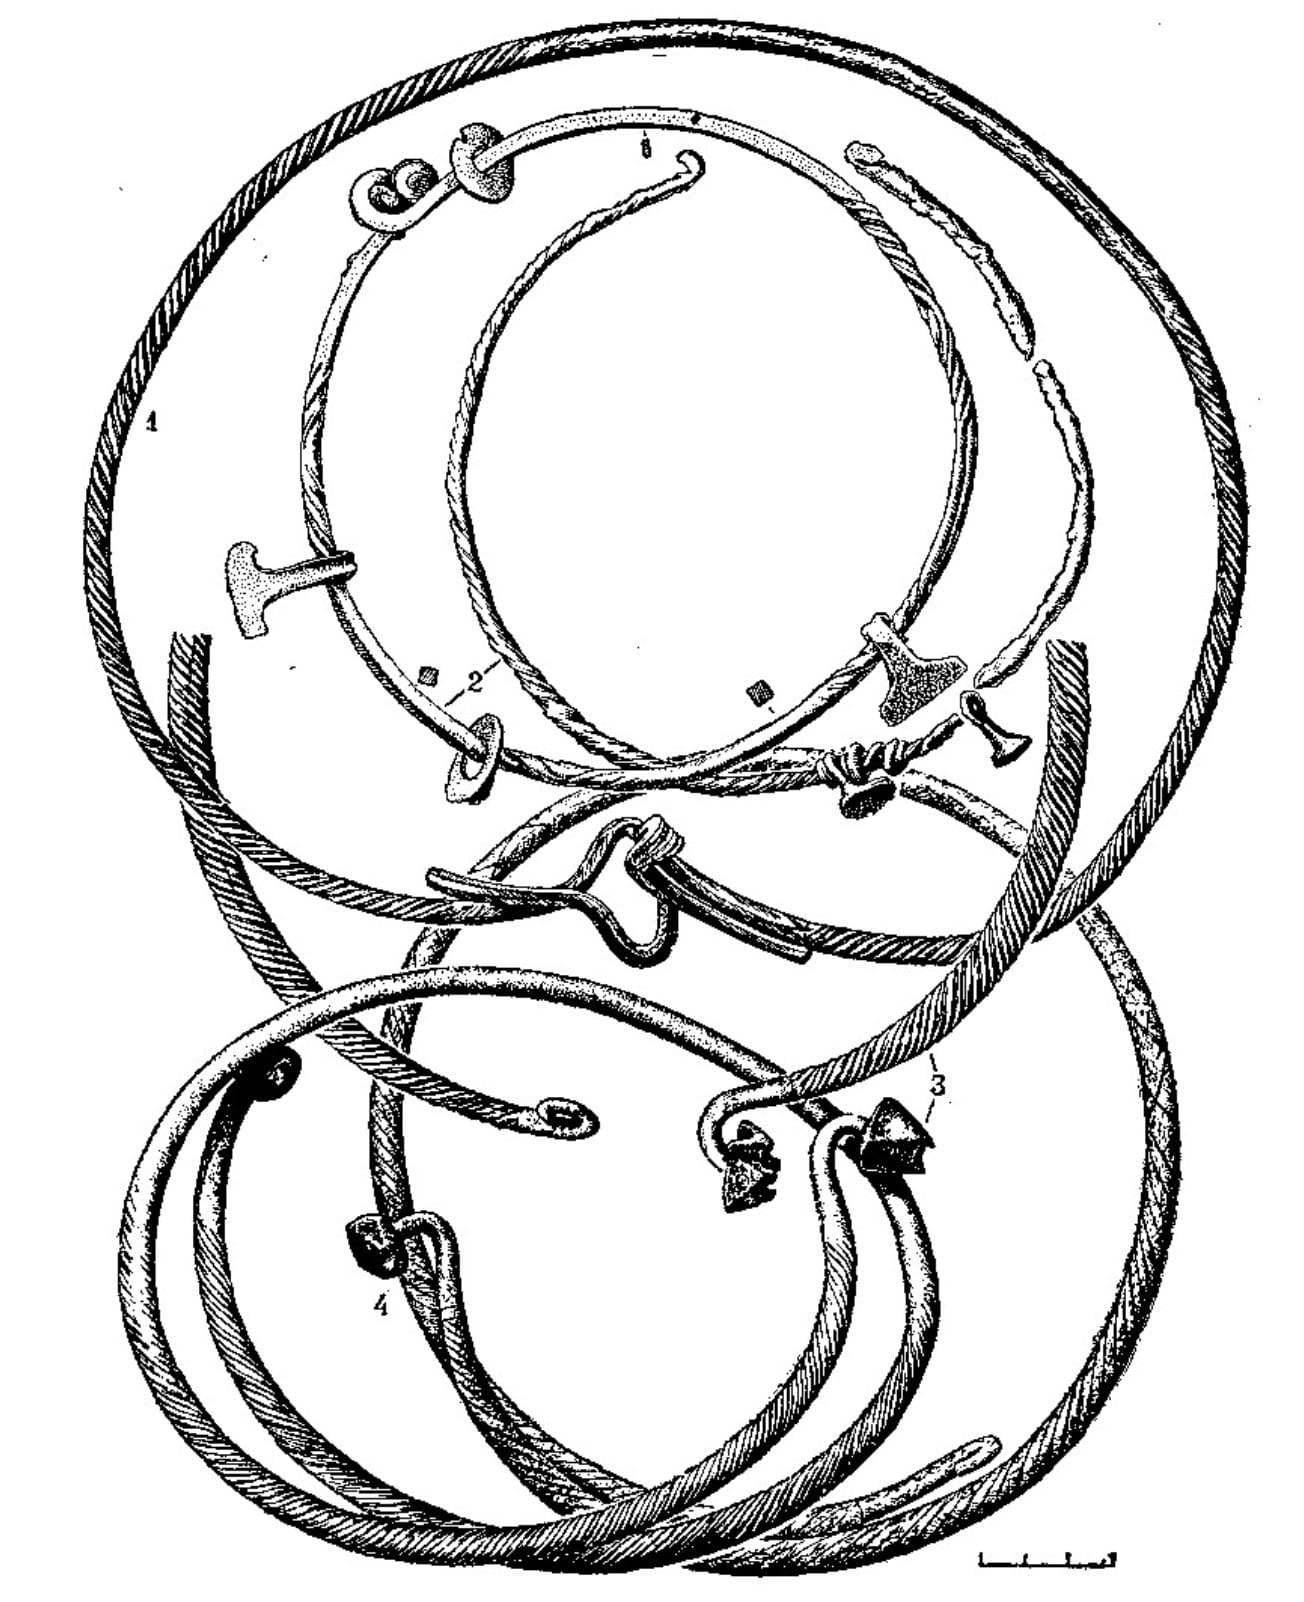 Torcs: One Form of Medieval Russian Neck Bling